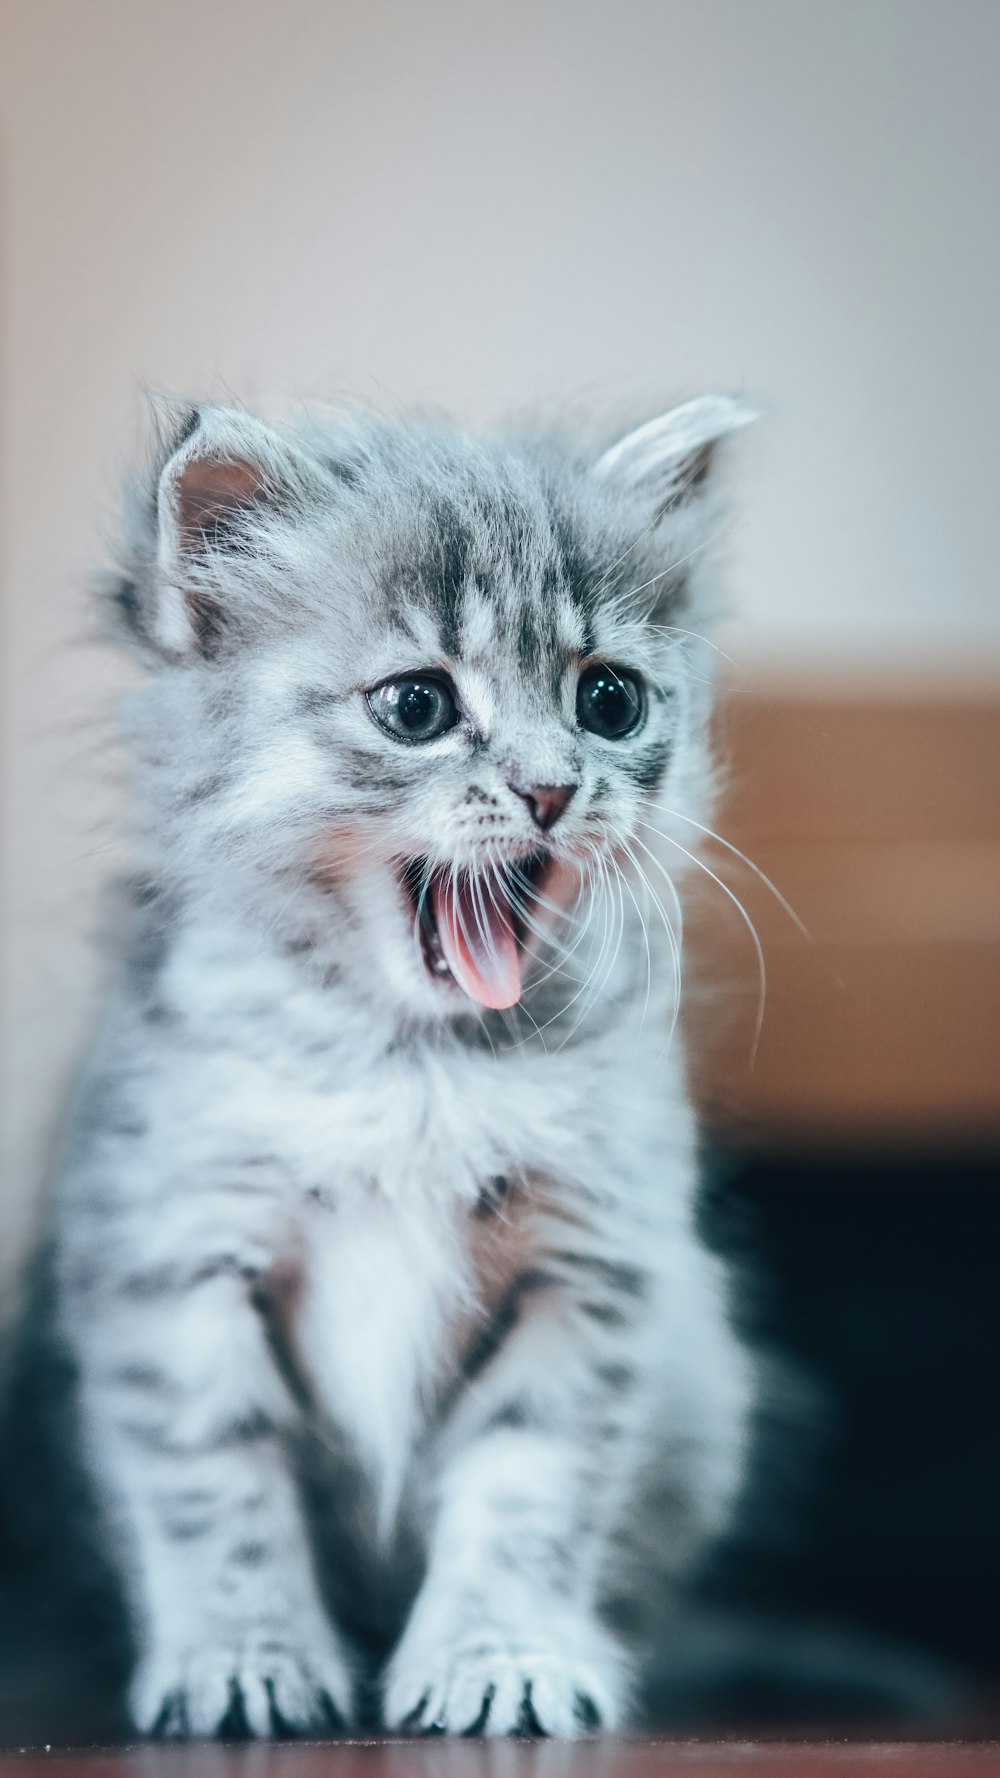 a kitten with its mouth open